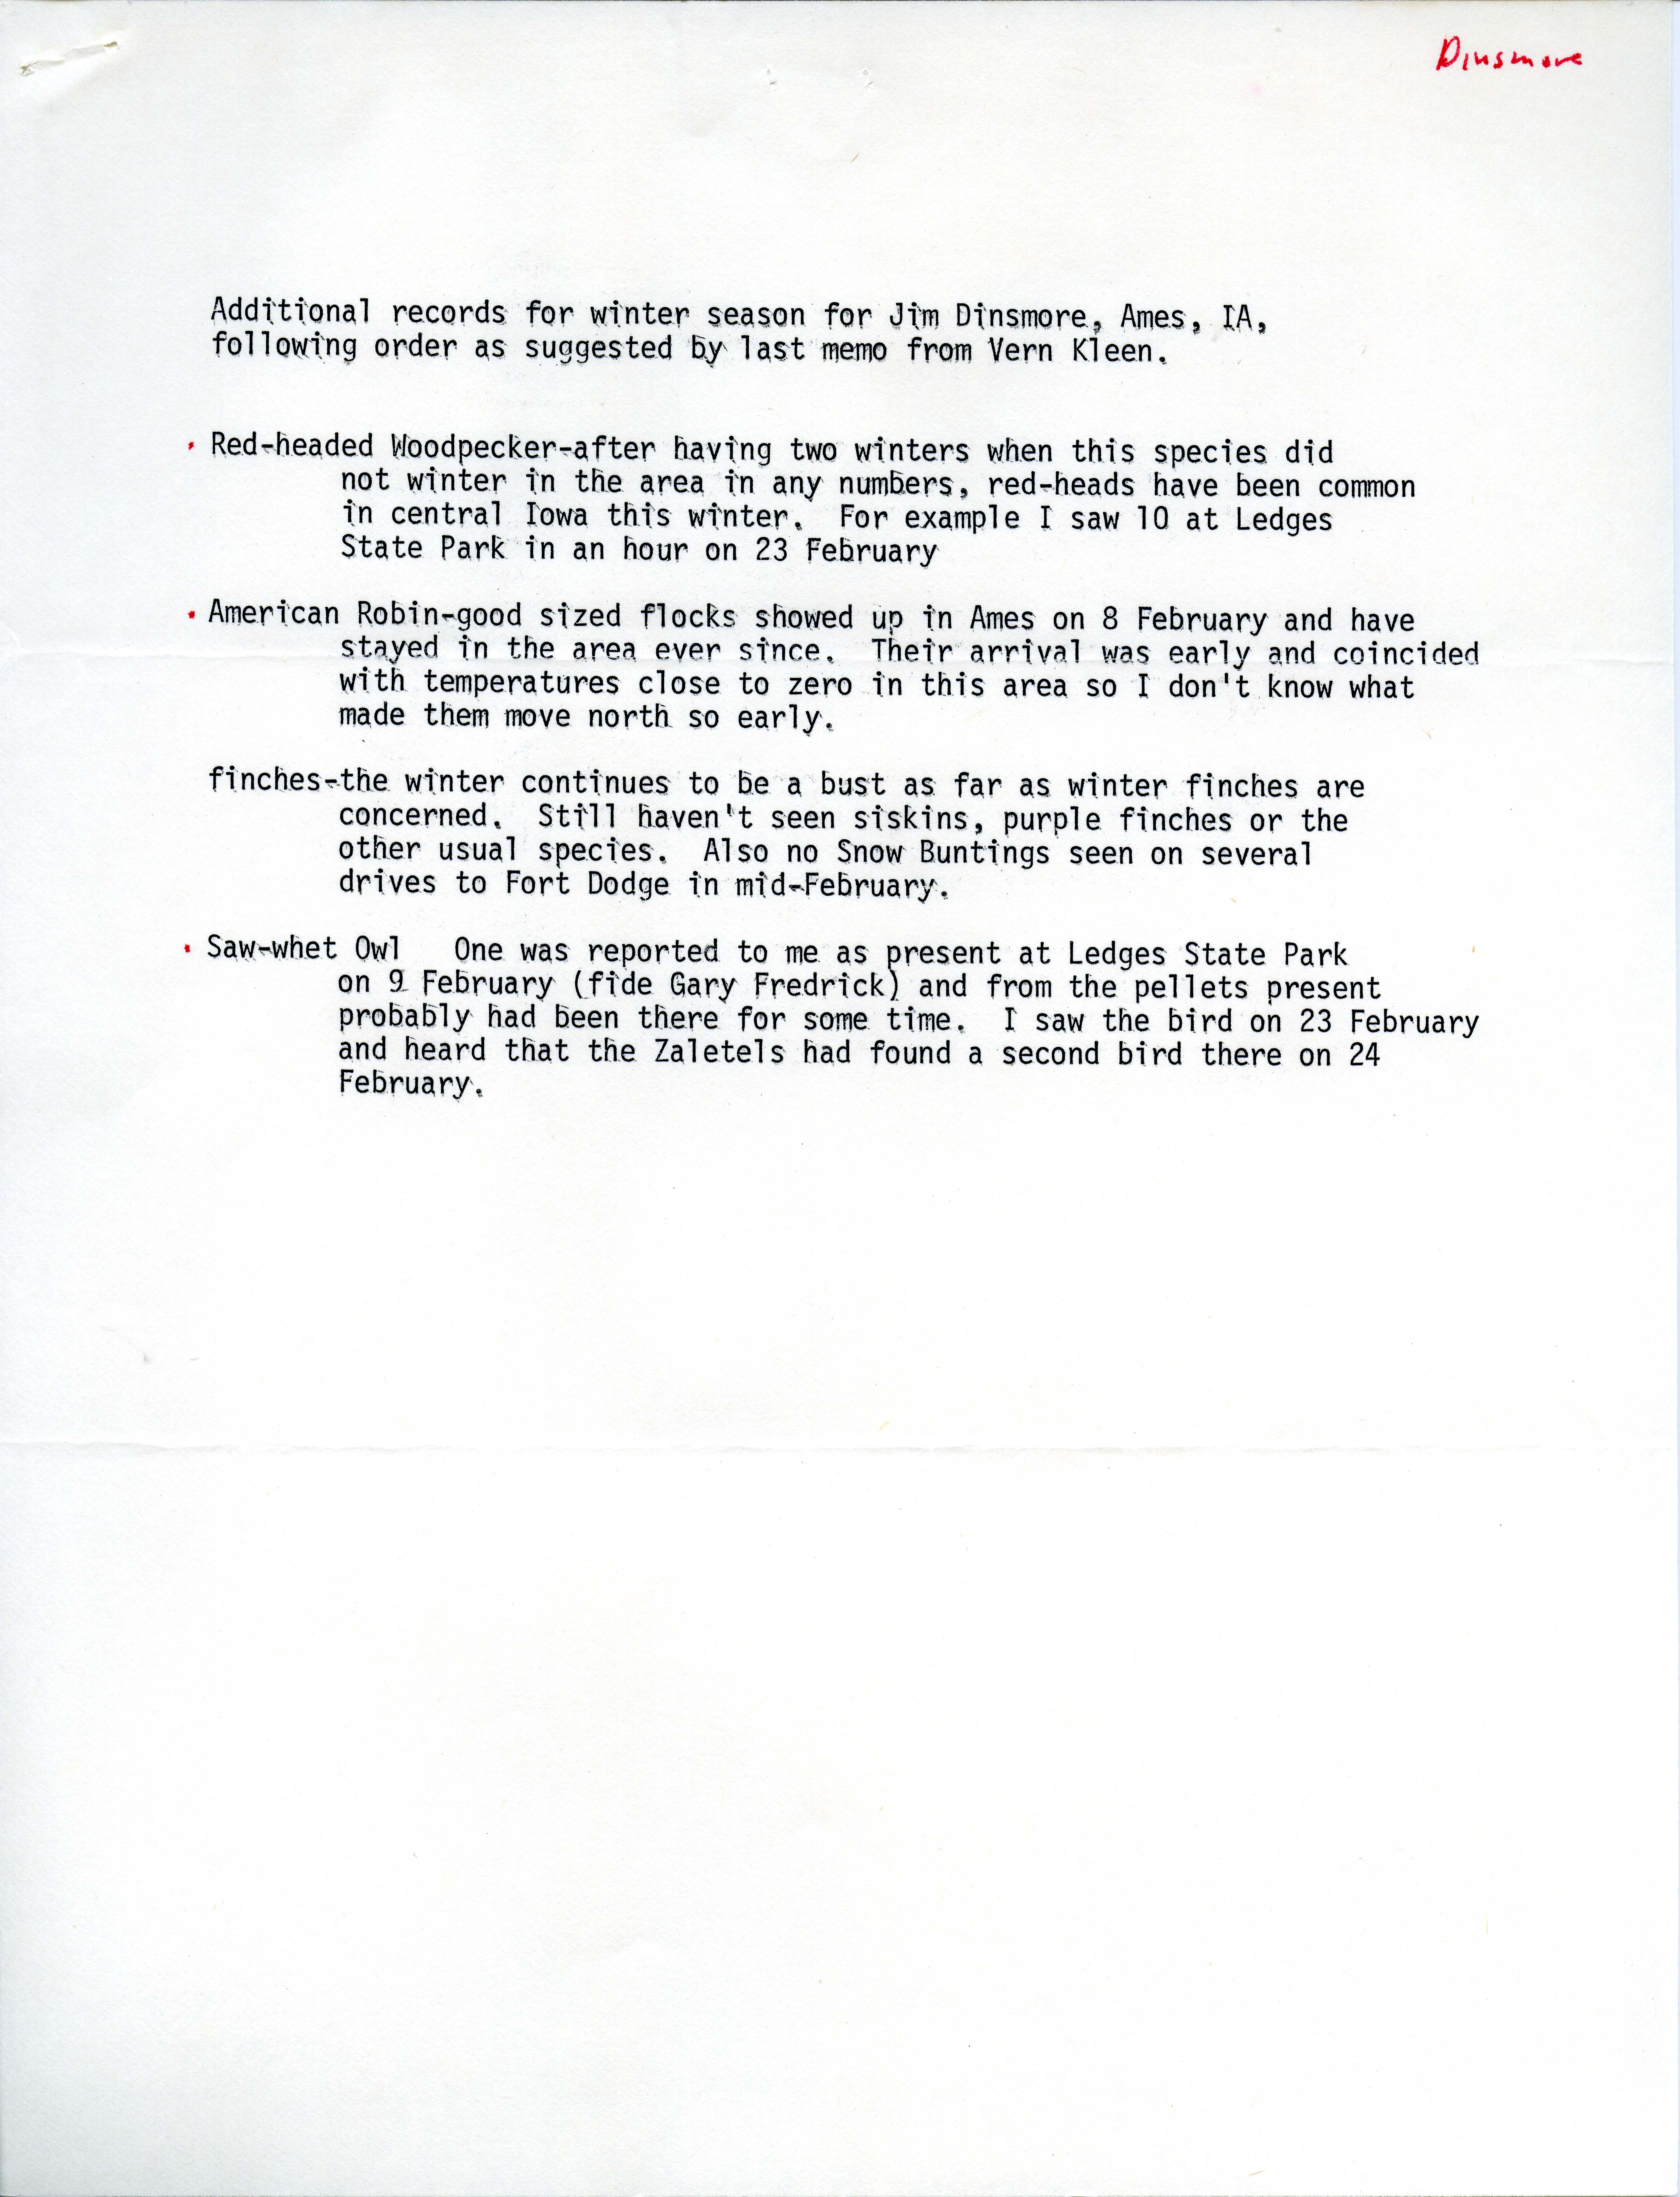 Field notes contributed by James J. Dinsmore, winter 1979-1980